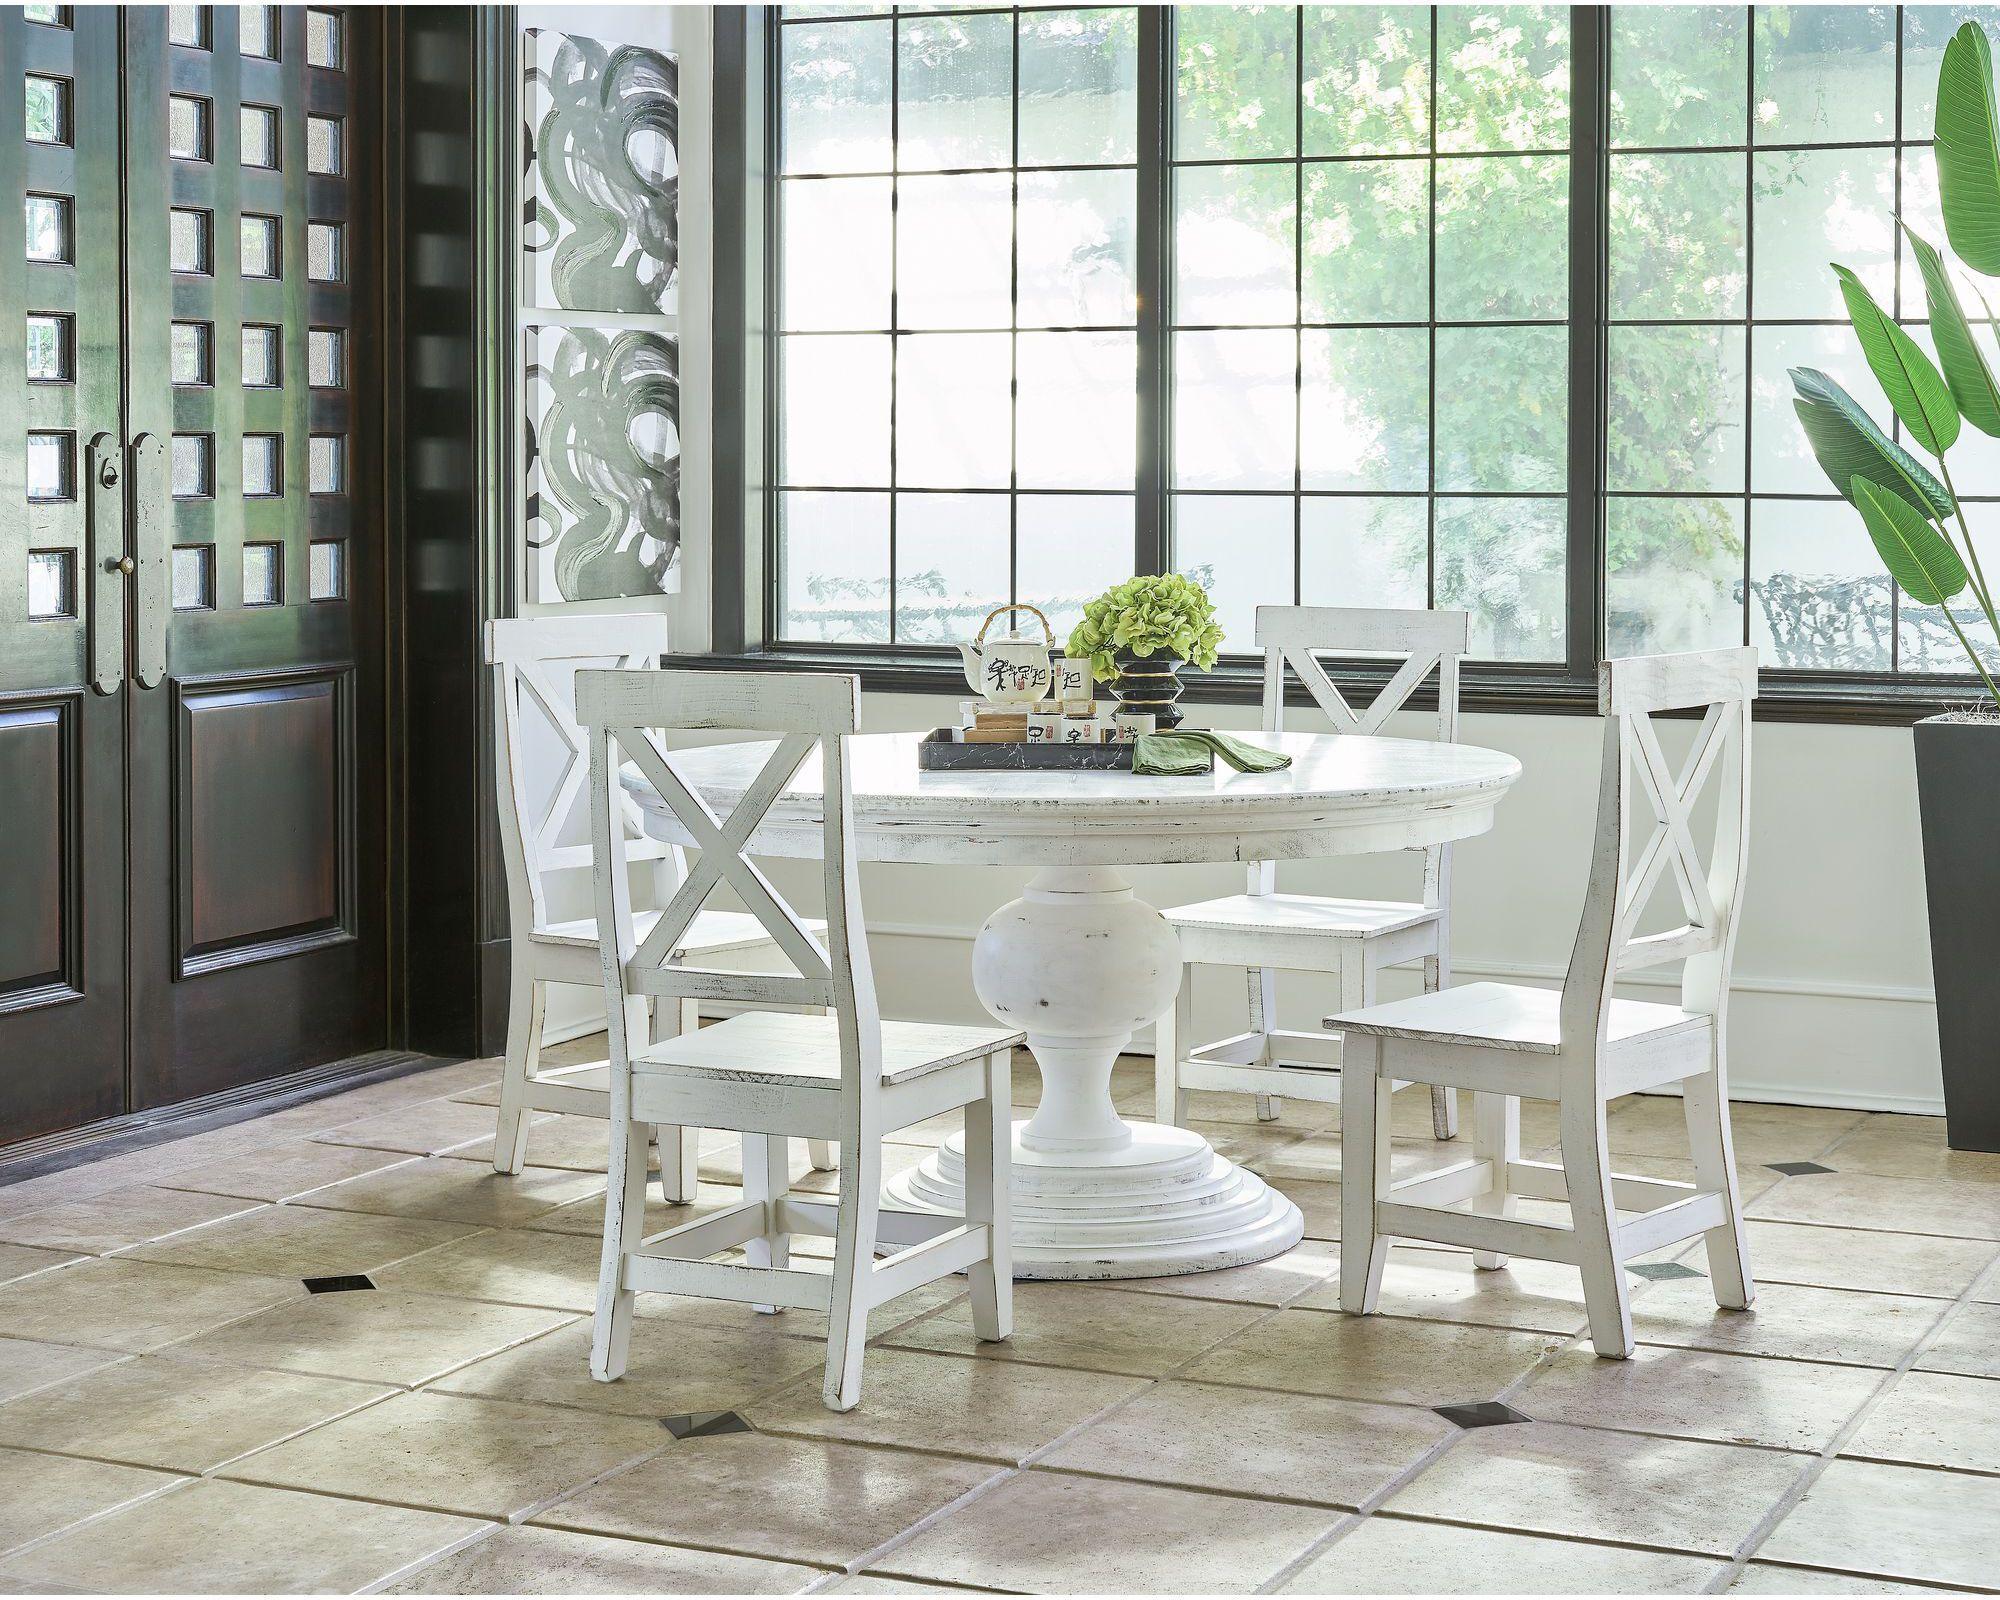 Elements Dining Tables - Brixton Calinda Standard Dining Table in White